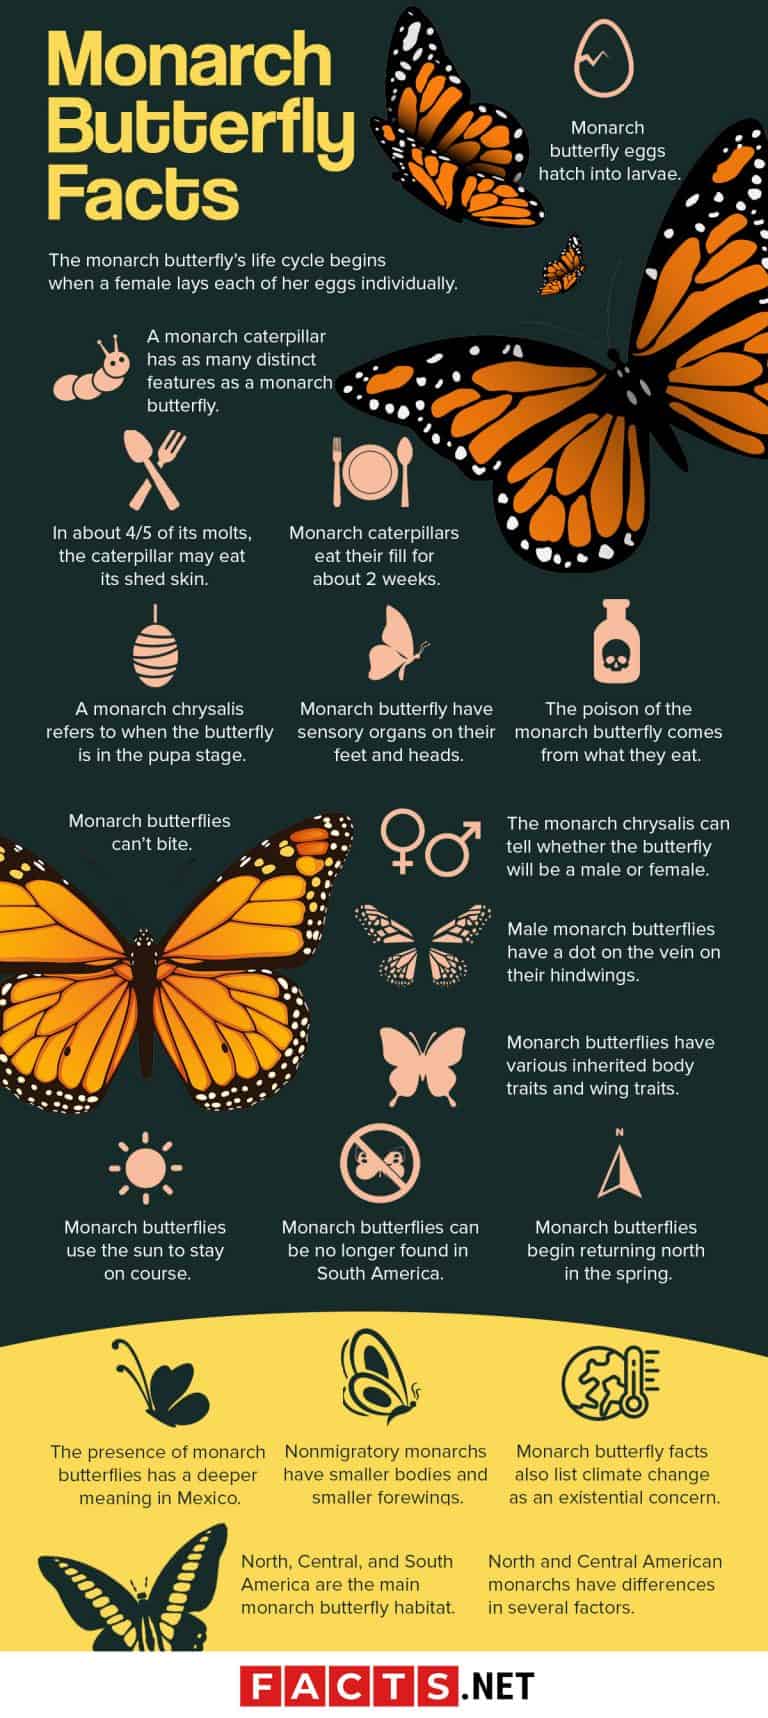 50 Magnificent Monarch Butterfly Facts You Can't Miss